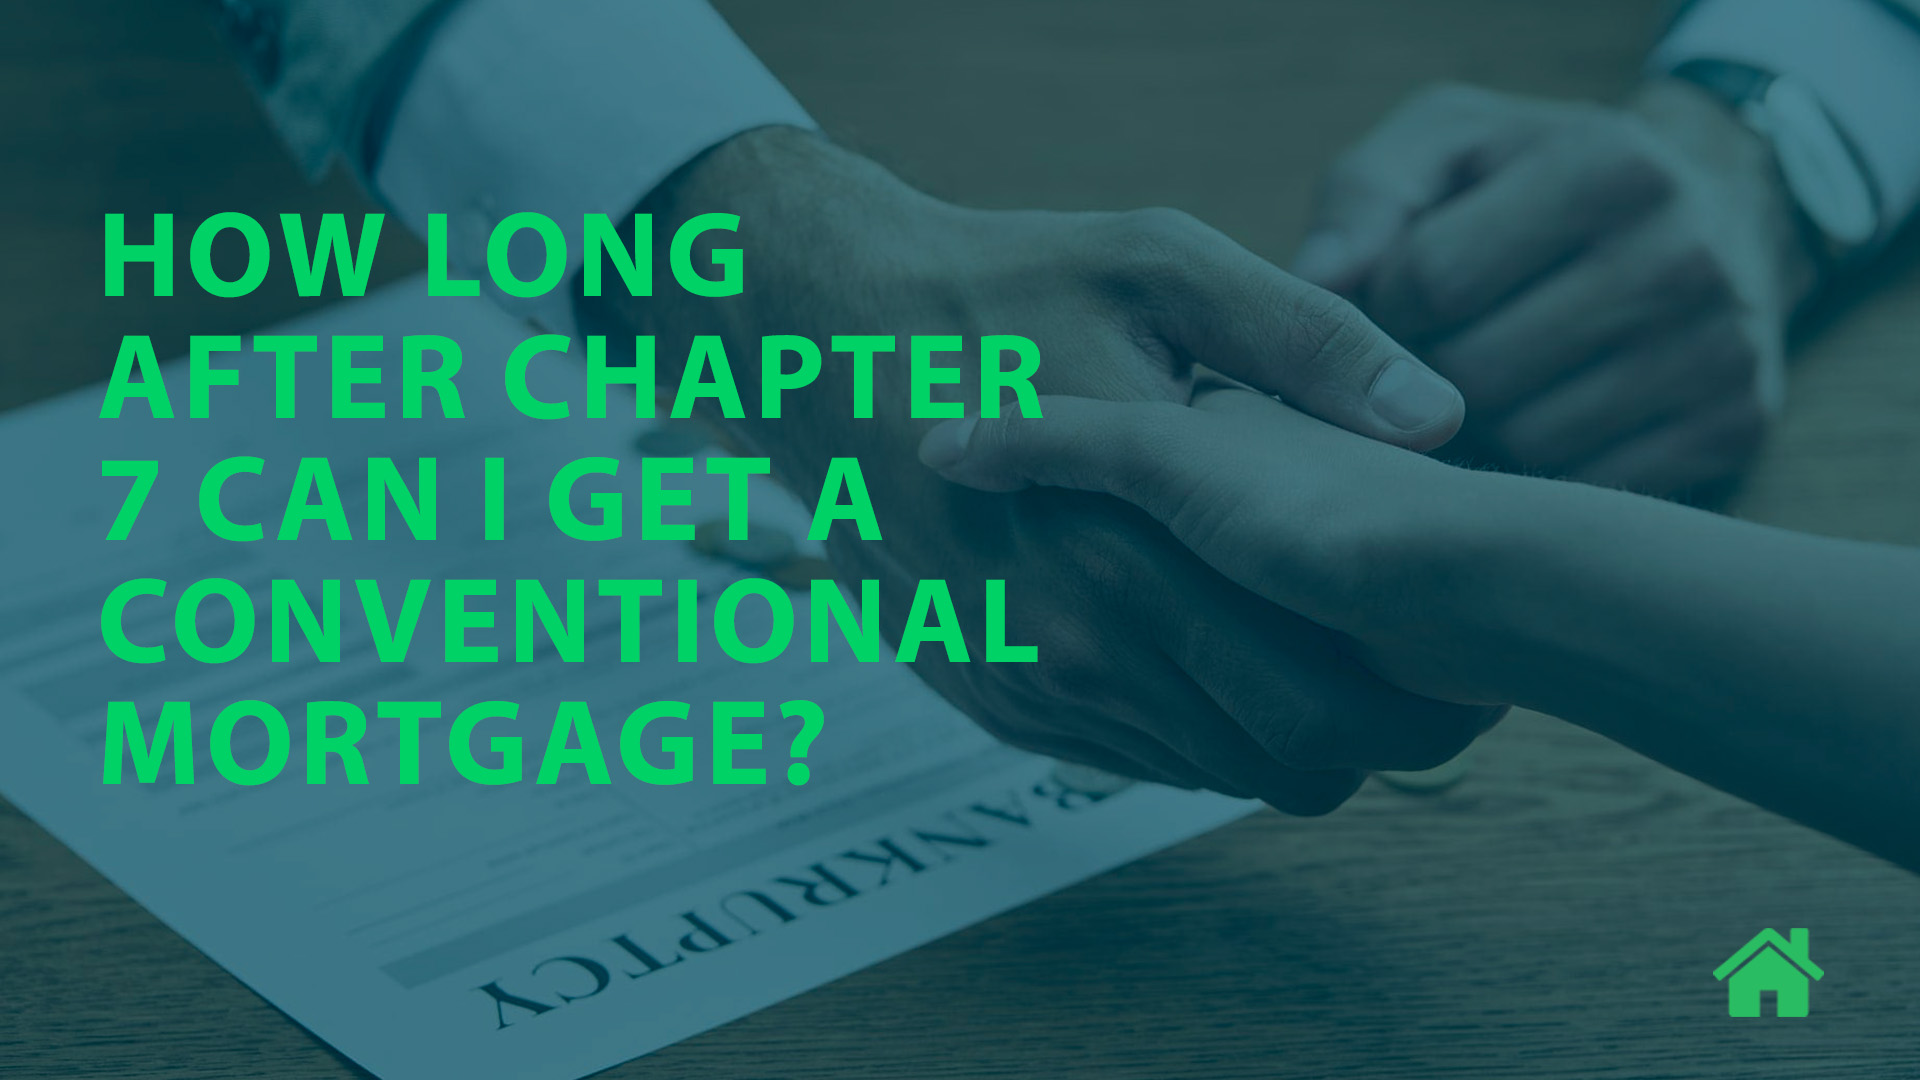 How long after chapter 7 can i get a conventional mortgage